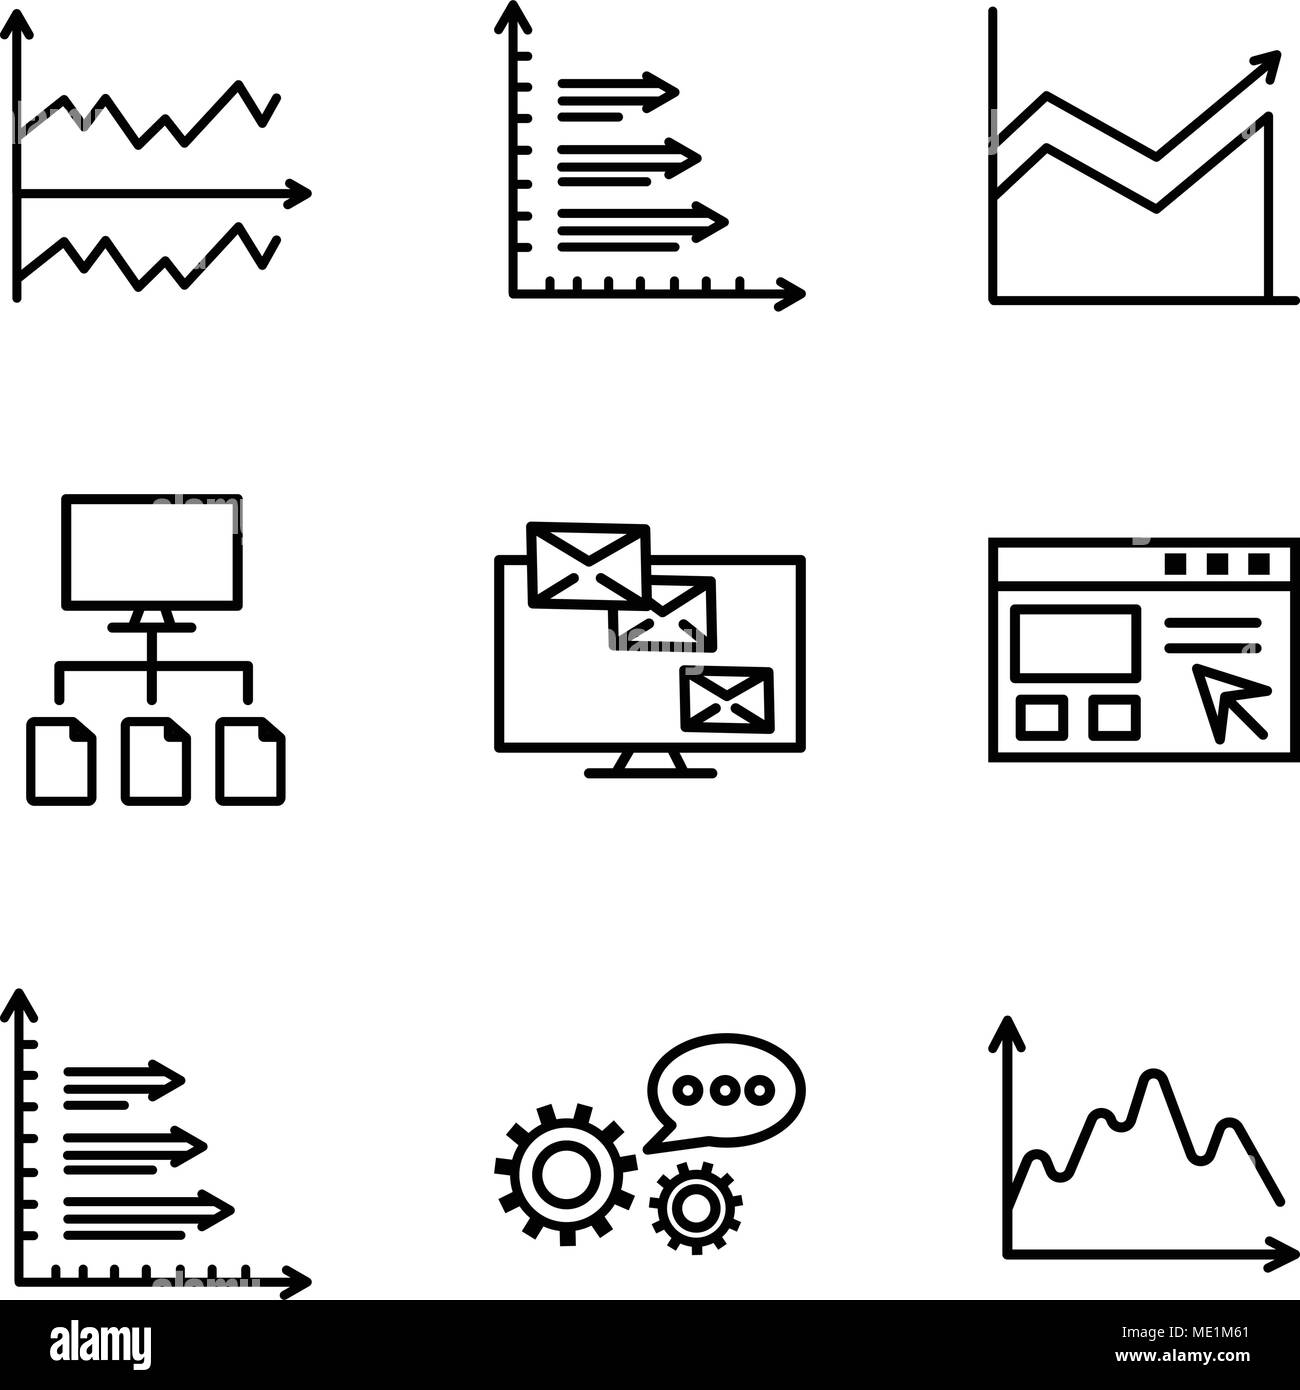 Set Of 9 simple editable icons such as Data, 3d data analytics, Bars, Data import interface, Monitor analytic, Data flow, Analytics, Chart, can be use Stock Vector